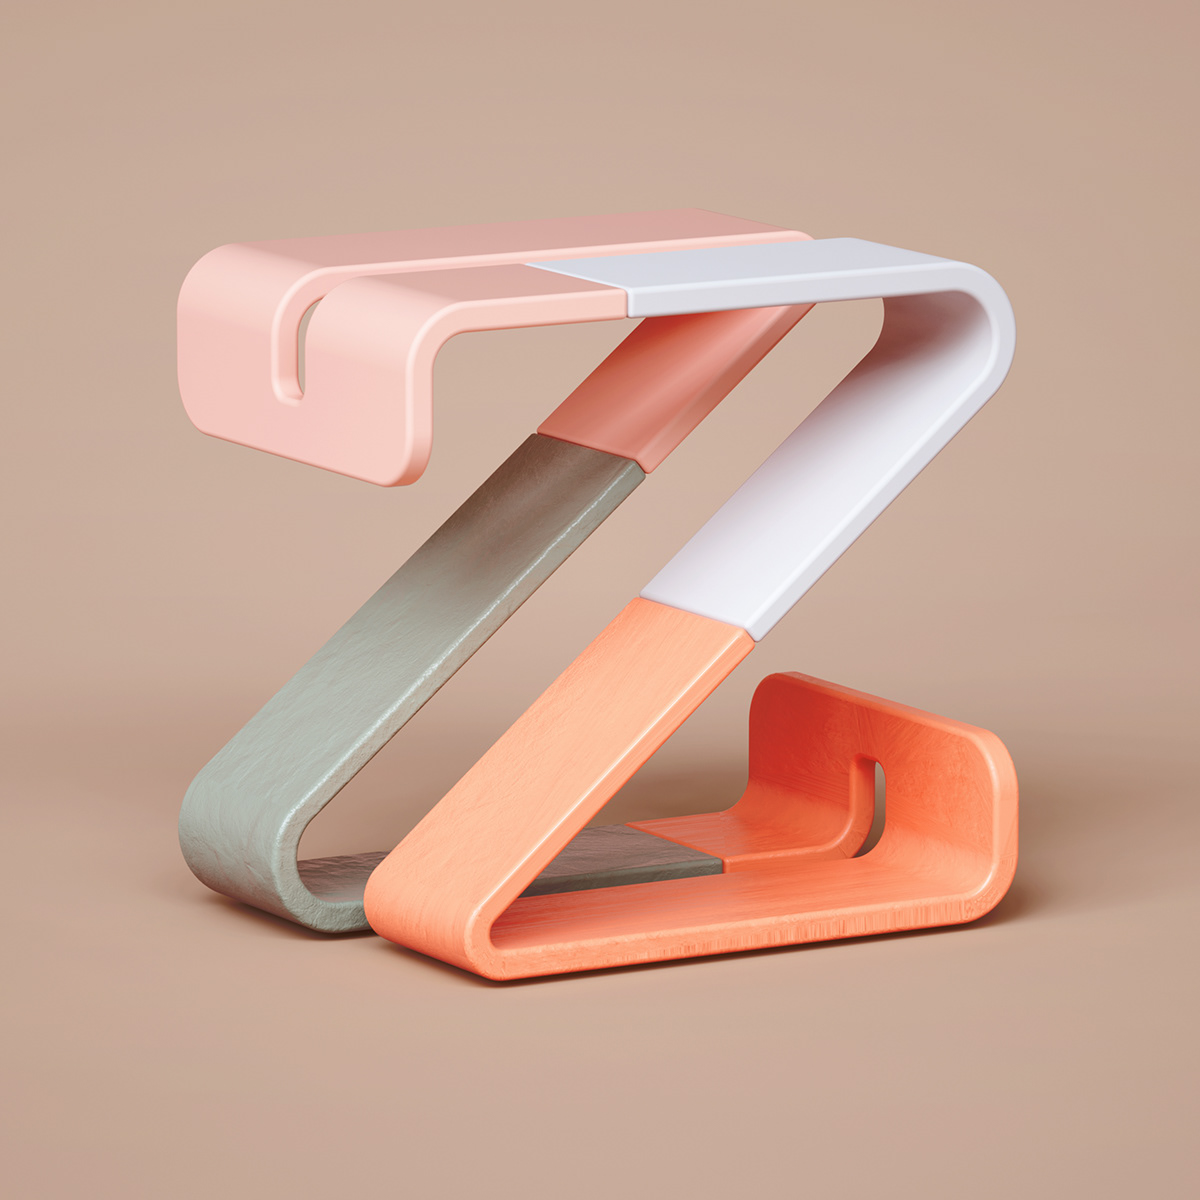 36daysoftype 3D numbers letters alphabets ufho singapore c4d 36days type